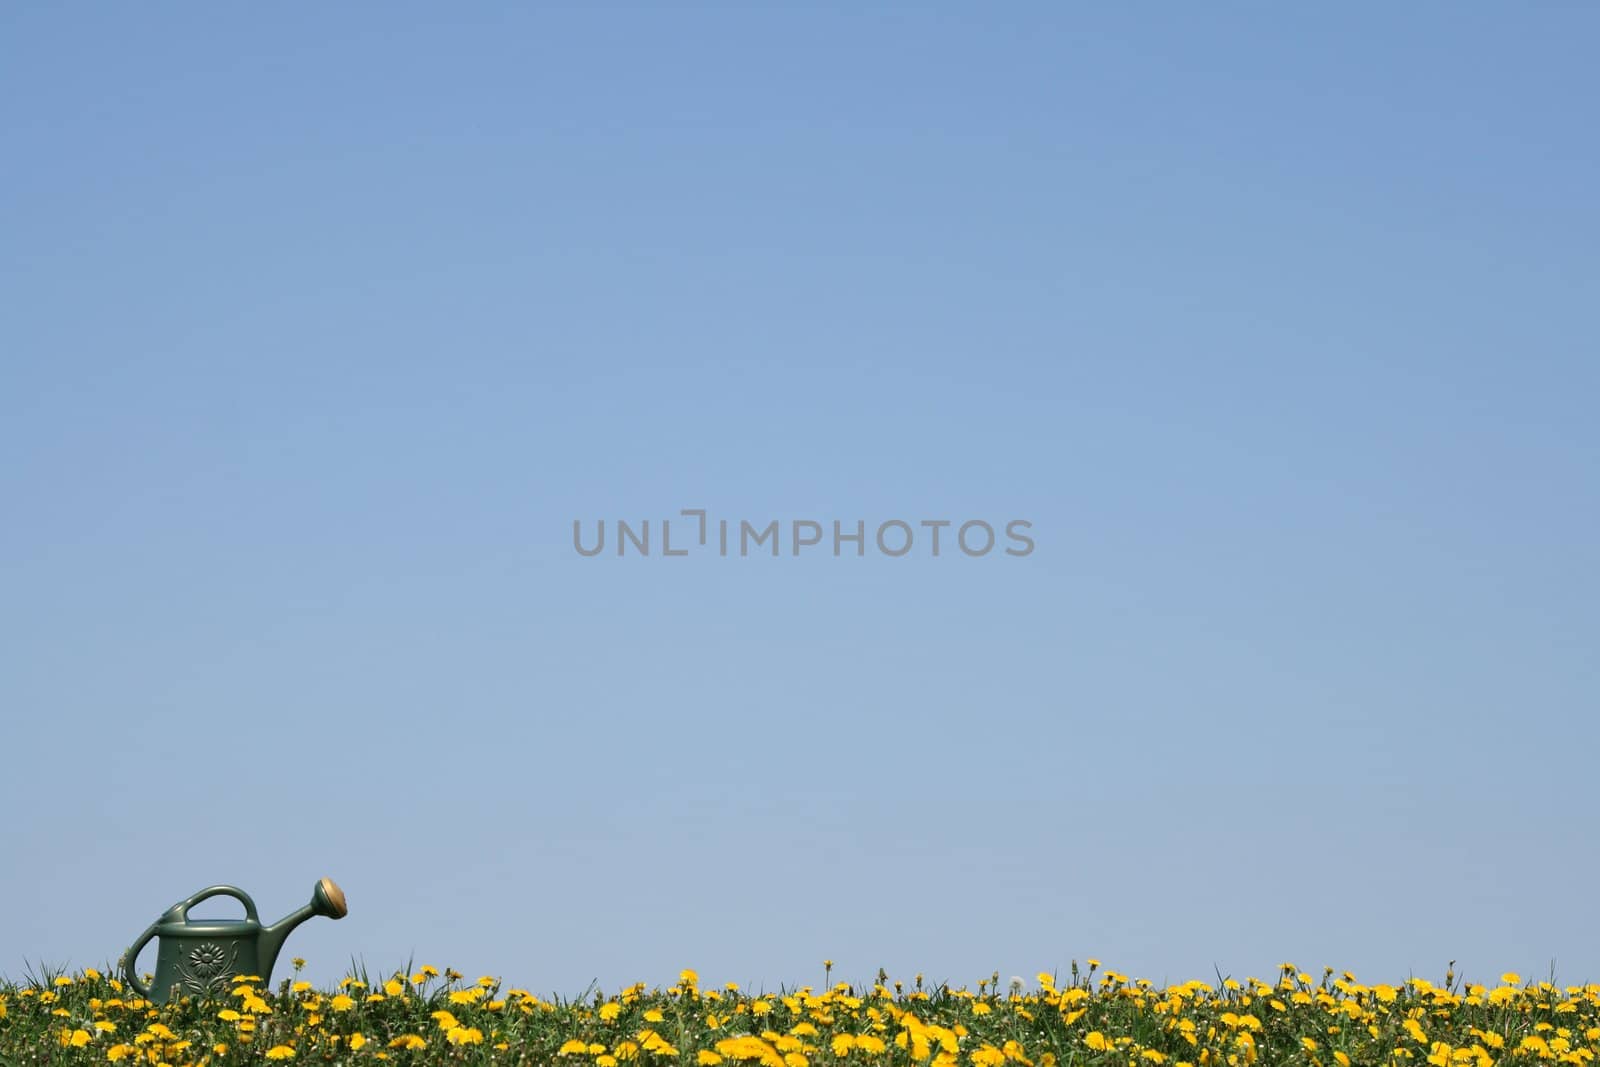 Green watering-can in a flowering dandelion field, with copy space.